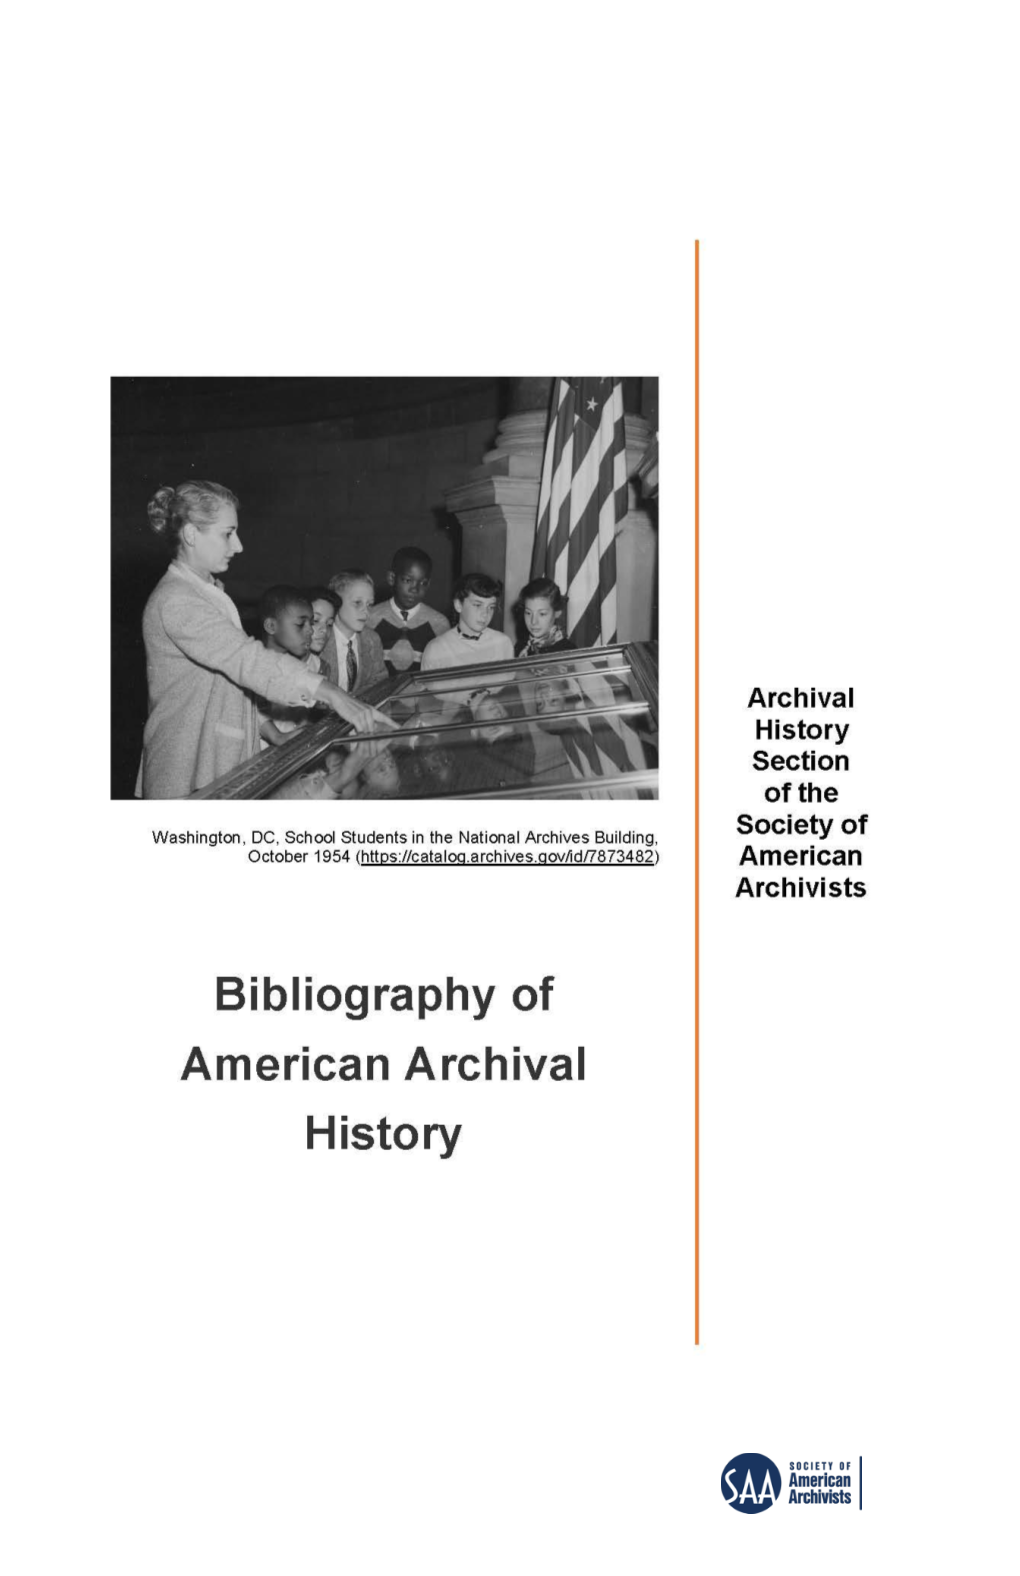 Bibliography of American Archival History